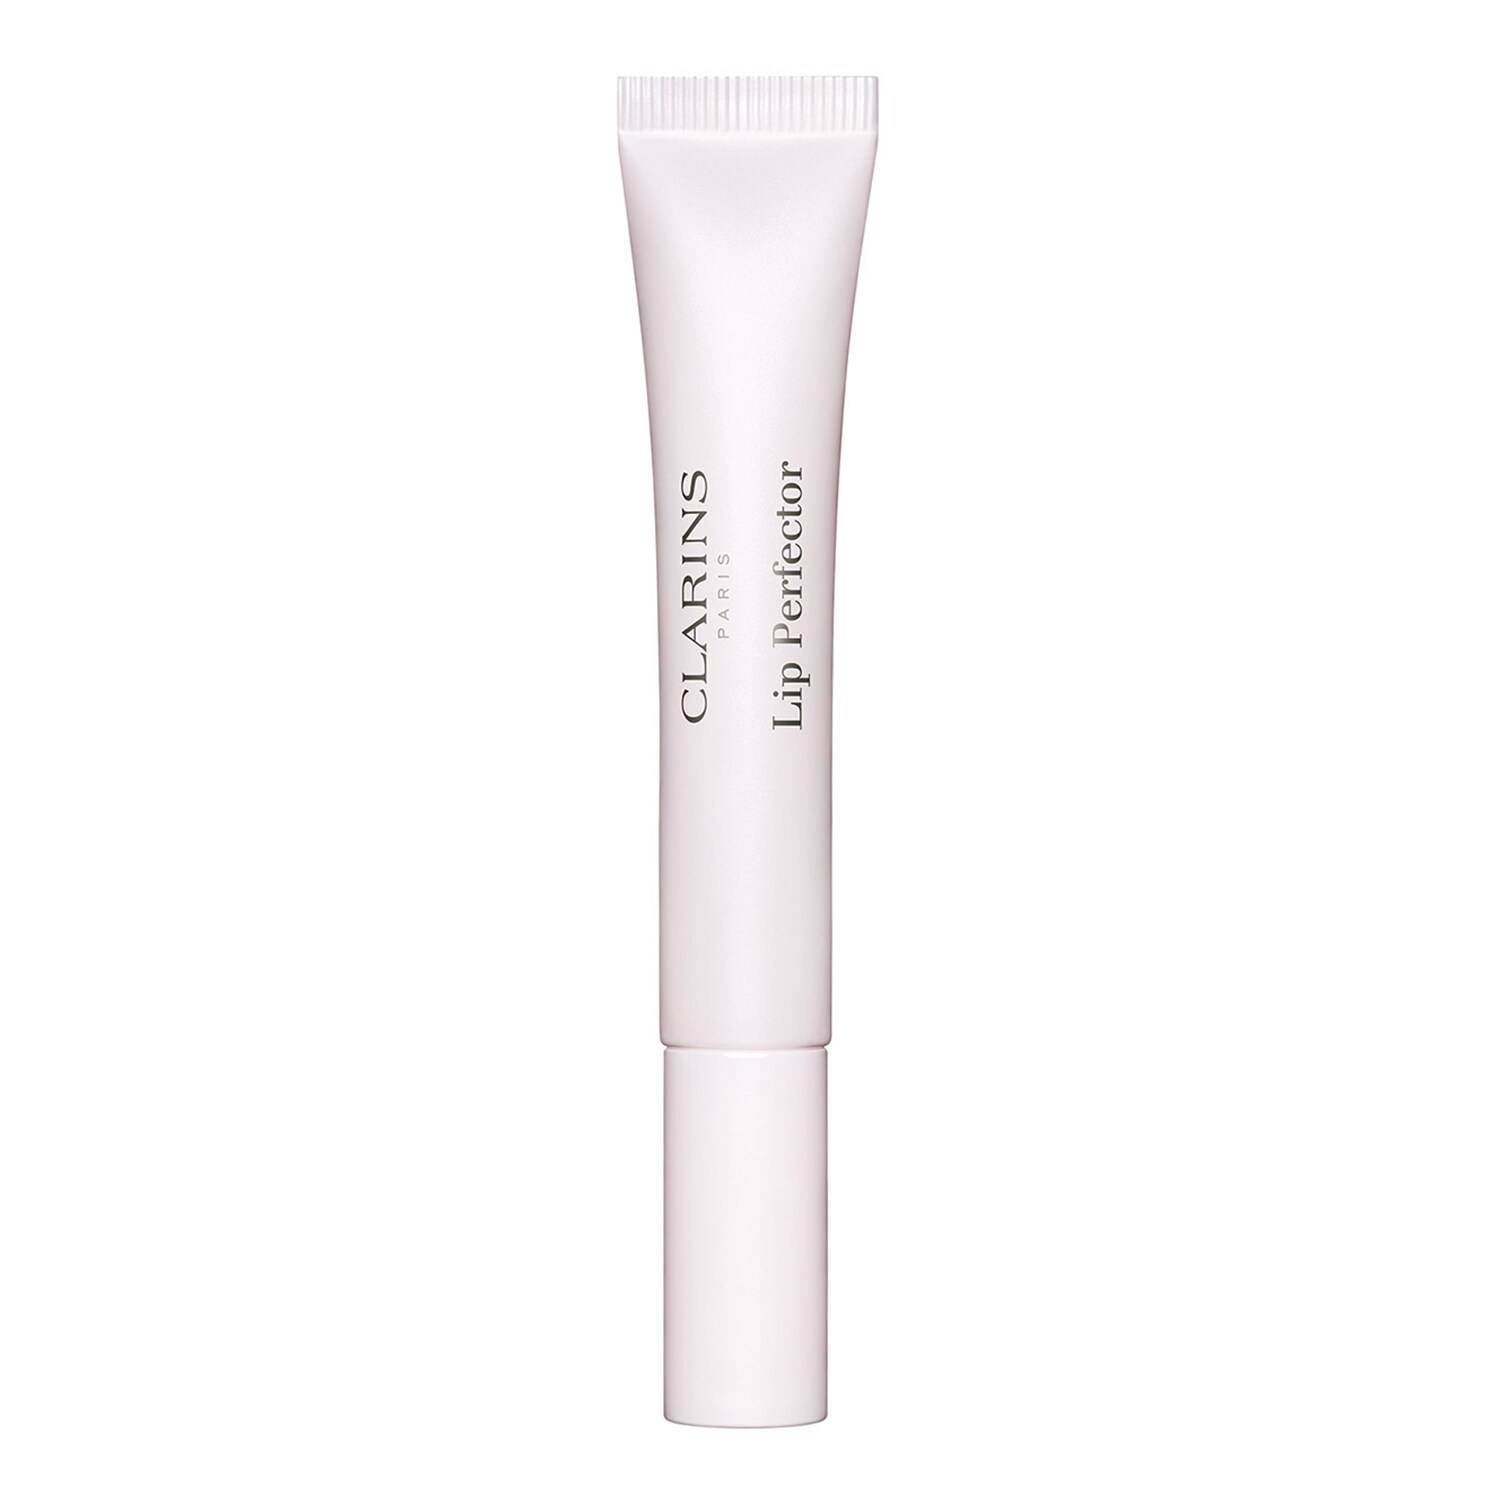 Clarins Lip Perfector - With Shea Butter 12Ml 20 - Translucent Glow